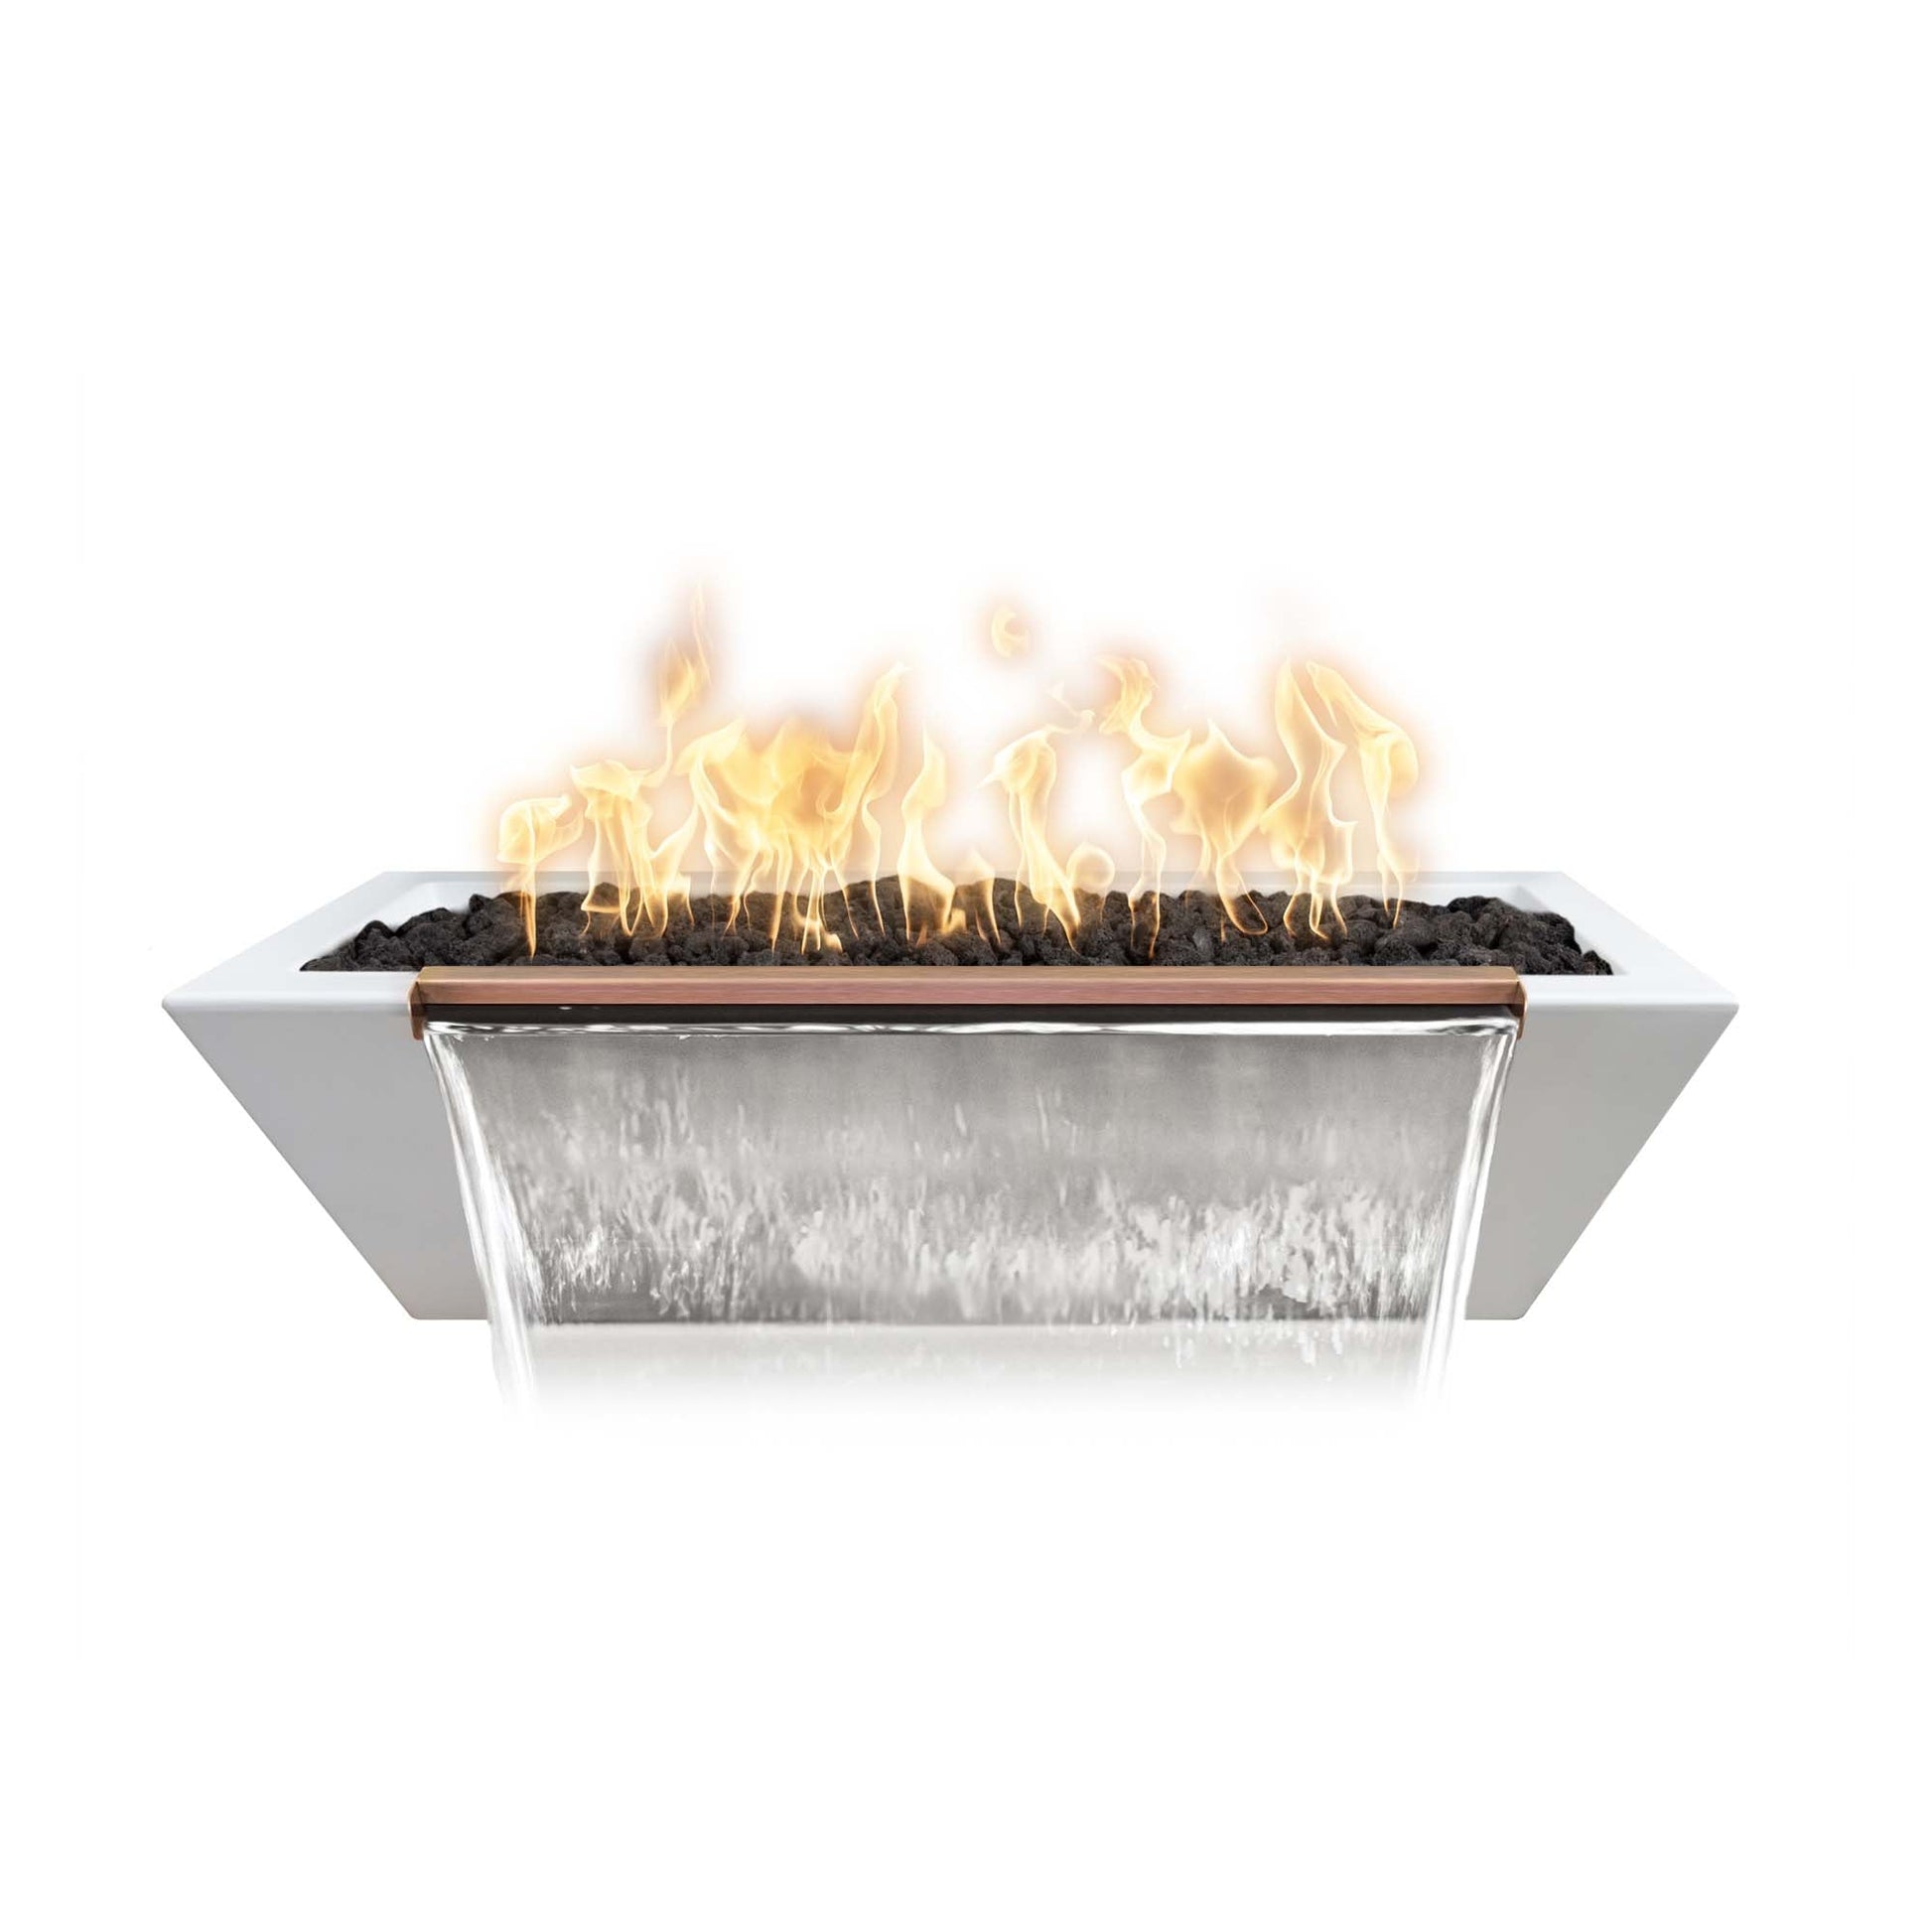 The Outdoor Plus Linear Maya 72" Ash GFRC Concrete Natural Gas Fire & Water Bowl with 12V Electronic Ignition